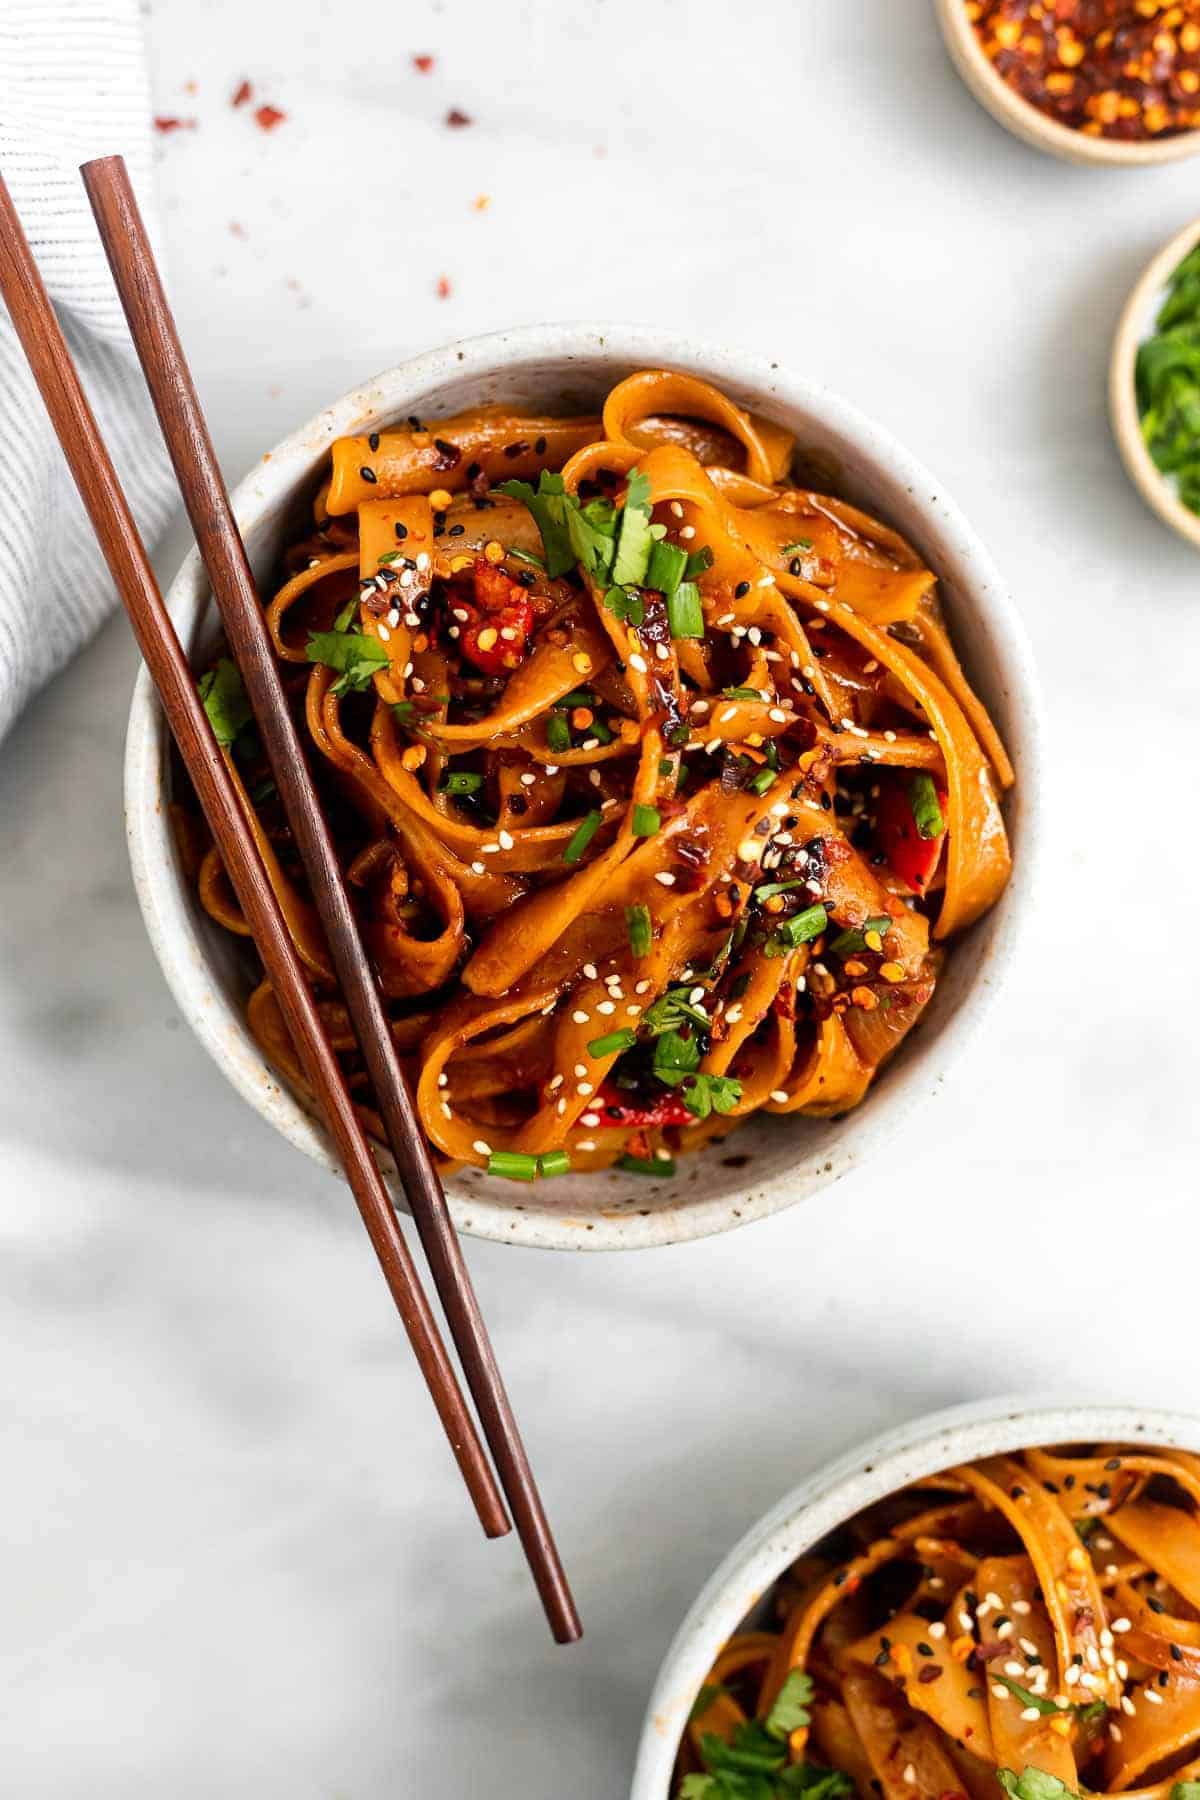 chili garlic noodles in a bowl with cilantro on top